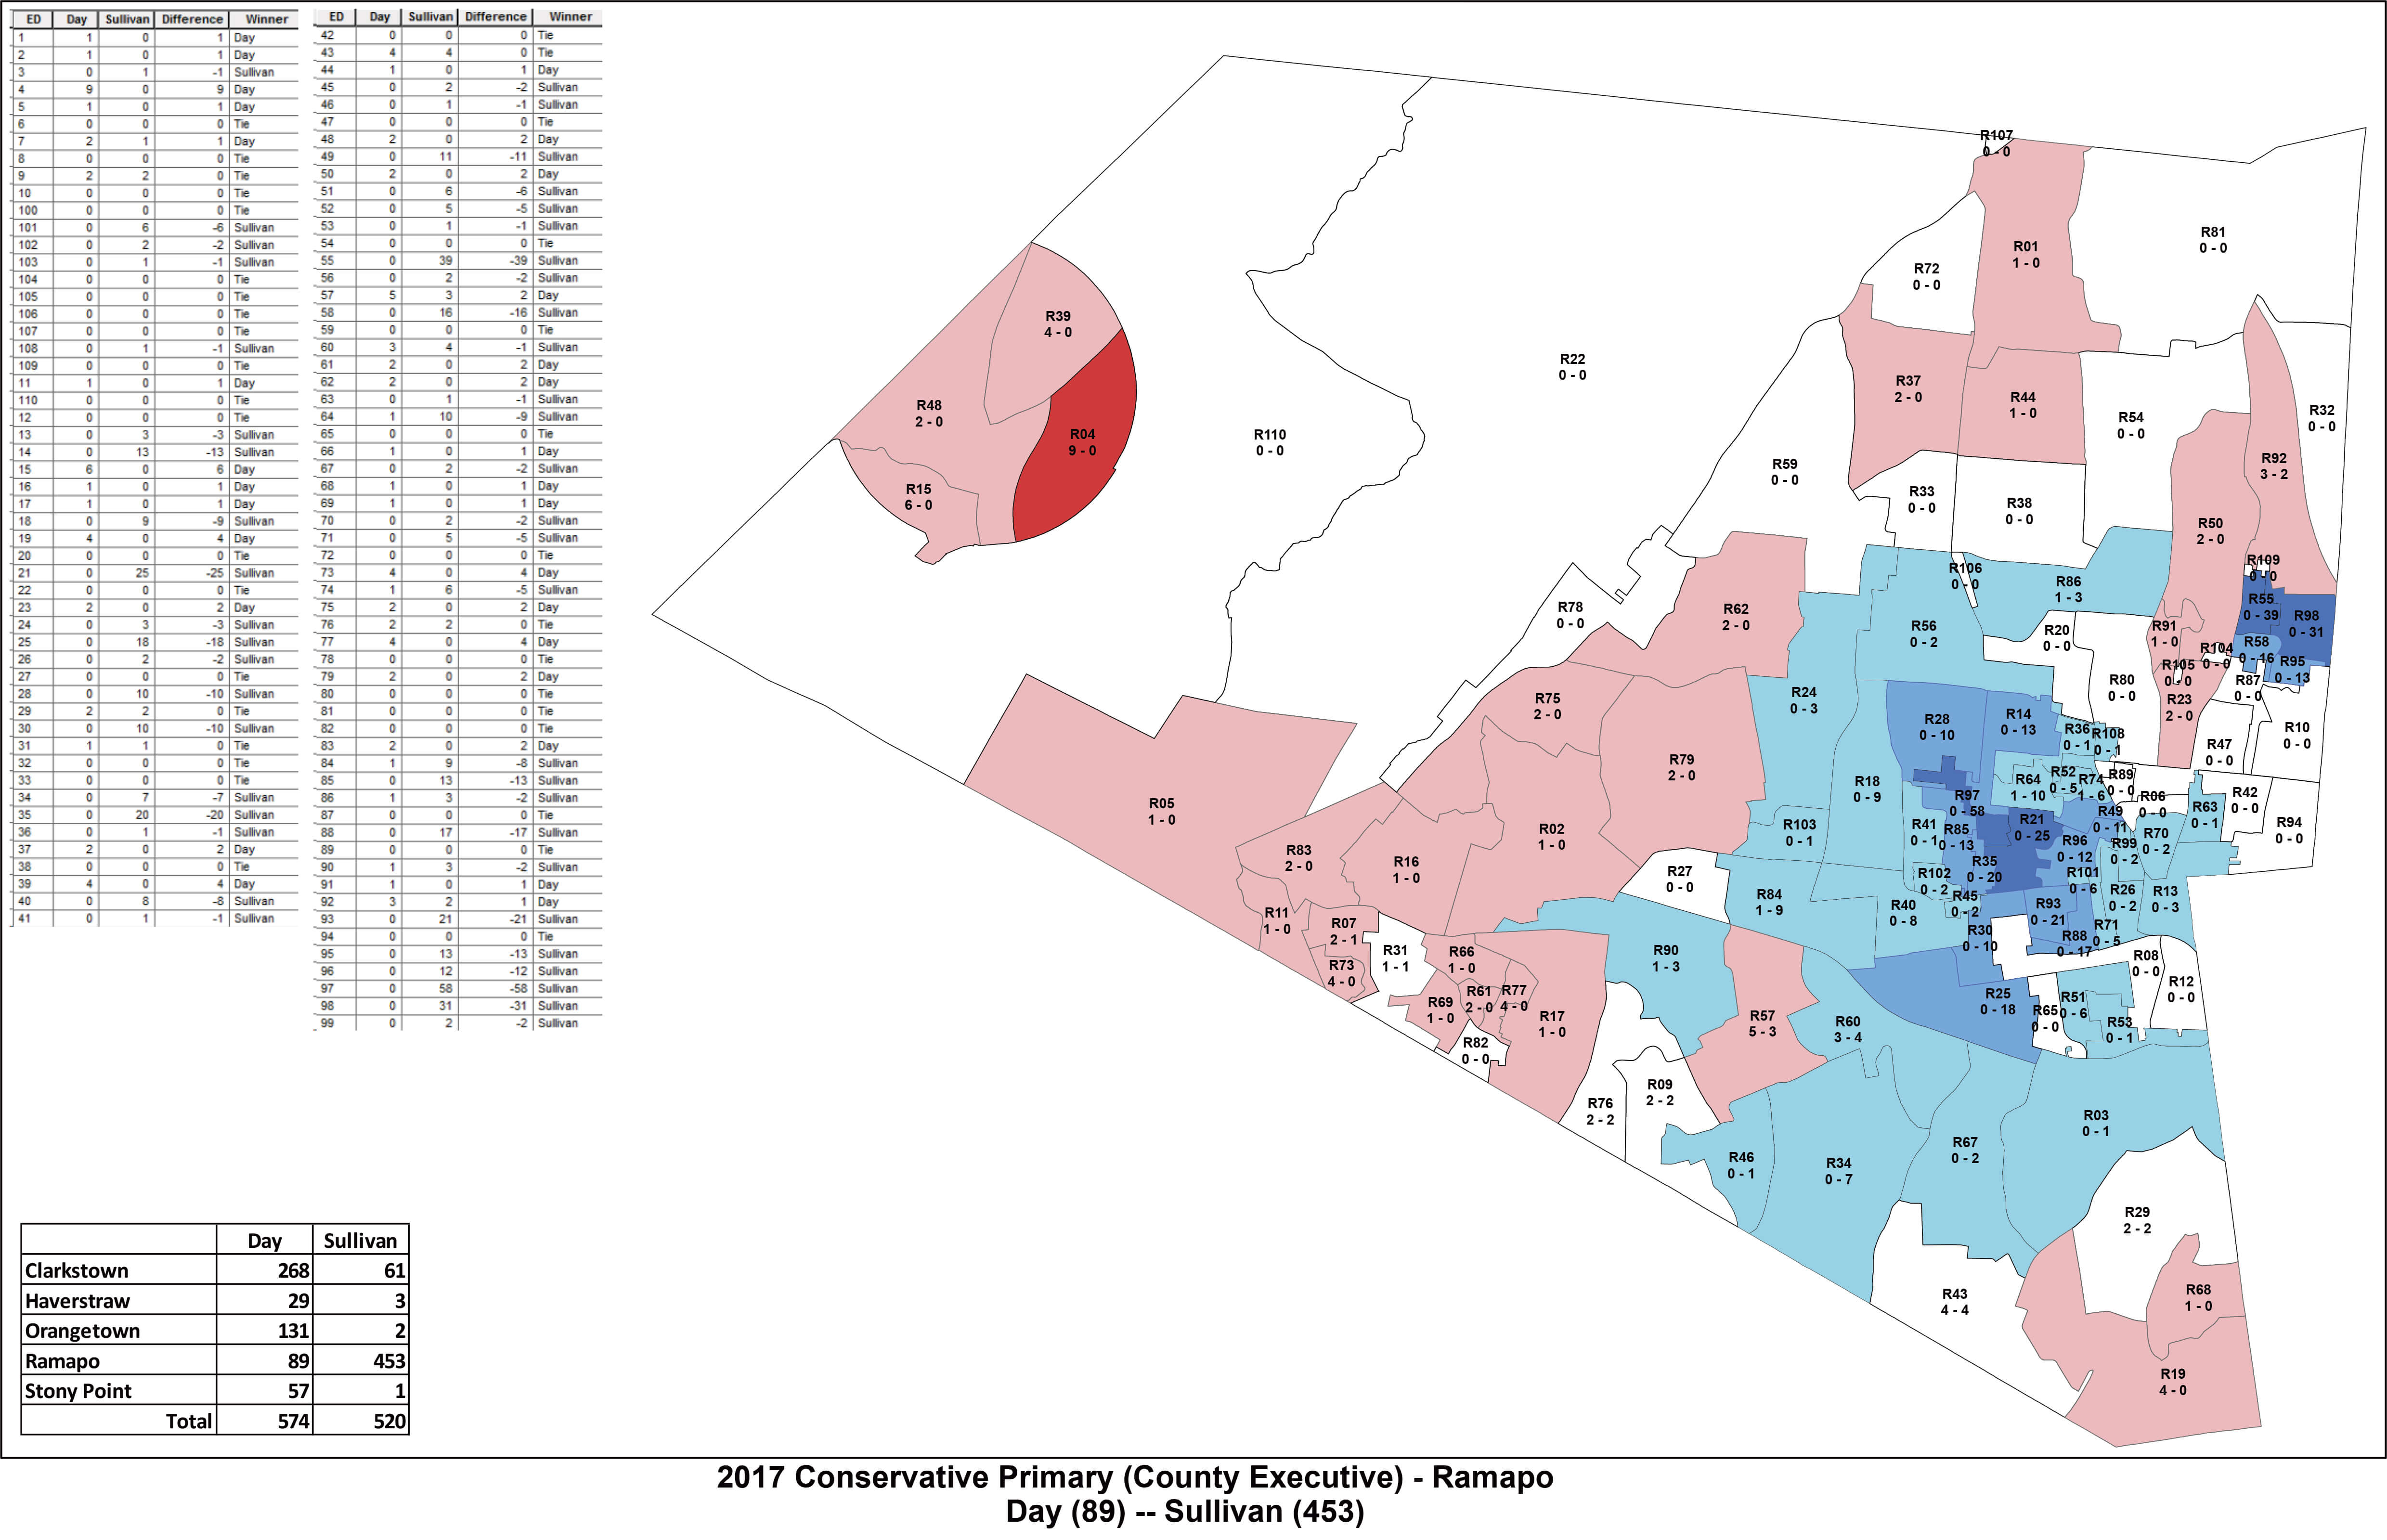 DISTRICT MAPS SHOW: Regardless of party, Rockland County elections are about Ramapo bloc vote